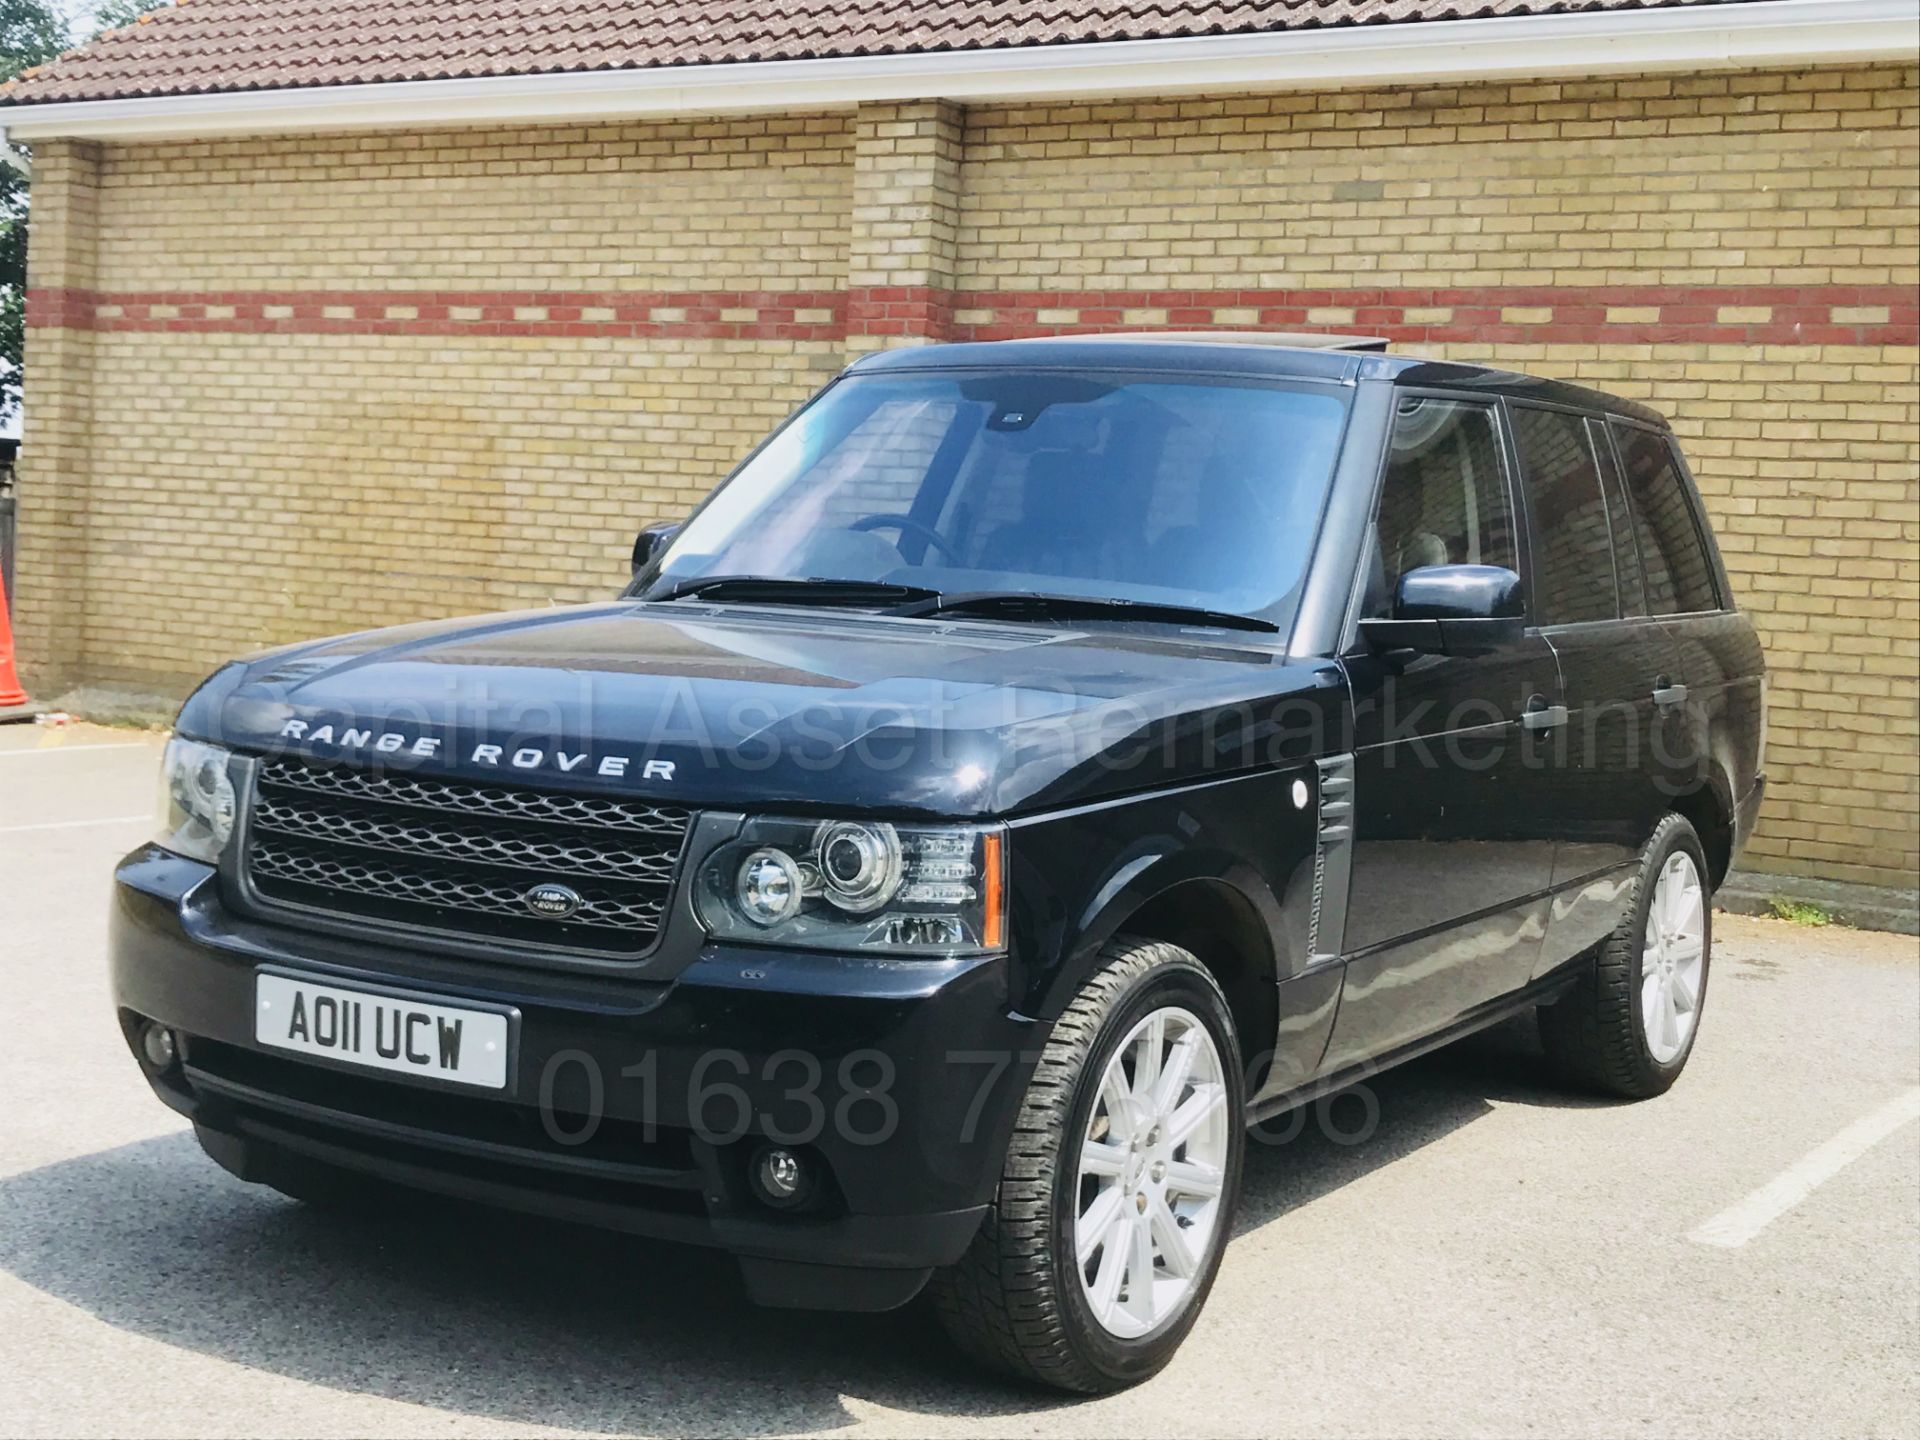 (On Sale) RANGE ROVER VOGUE SE (2011) 'TDV8 -8 SPEED AUTO' **FULLY LOADED** (1 OWNER - FULL HISTORY) - Image 2 of 60